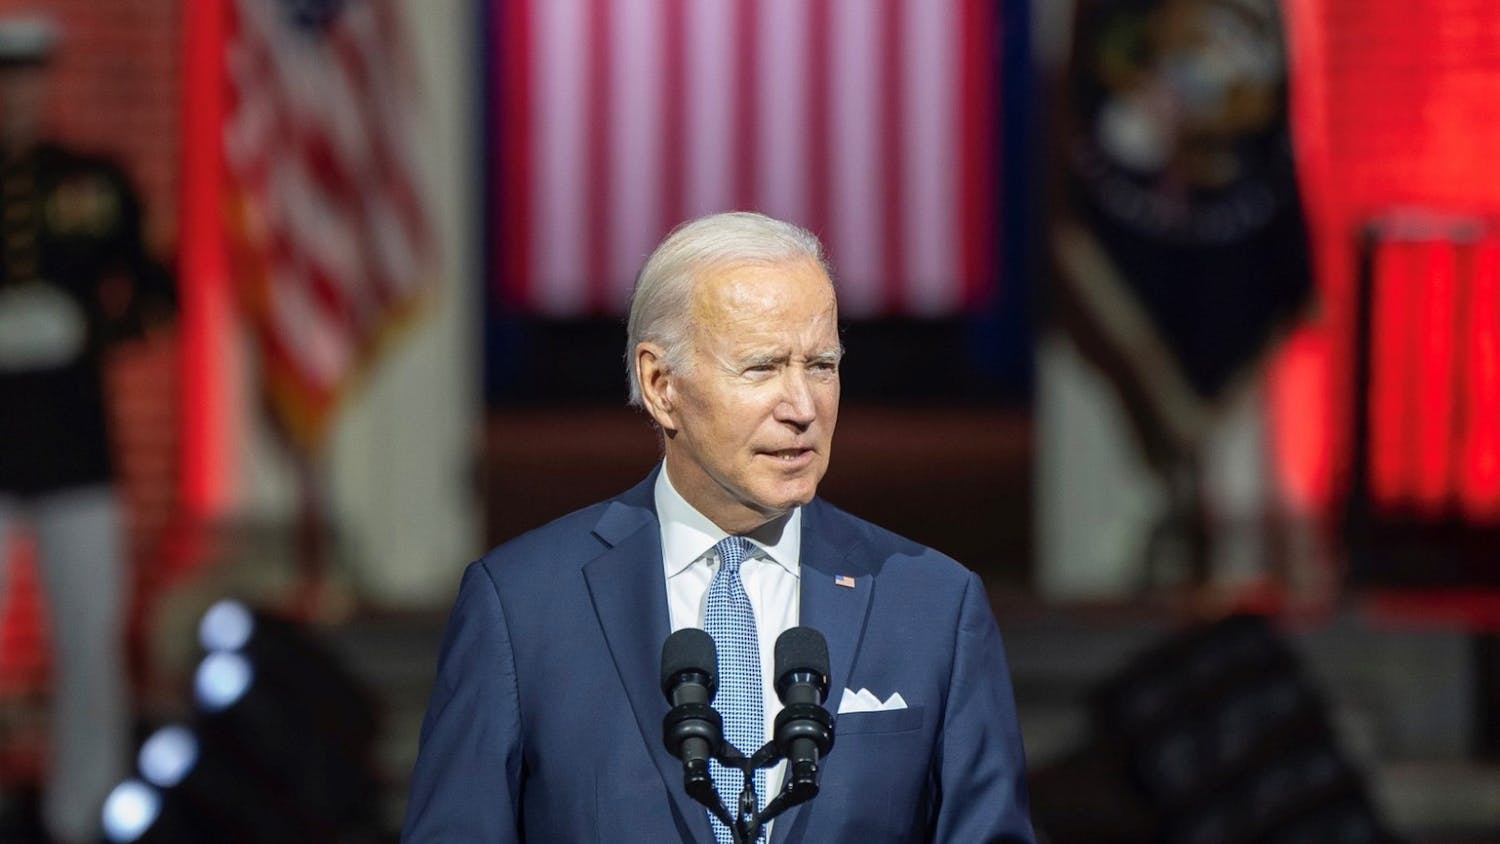 President Biden delivered a speech at Independence Hall, in which he directly confronted the “threat” posed by Donald Trump and those who support him. (Office of the President. Posted to Facebook on Sept. 1, 2022)